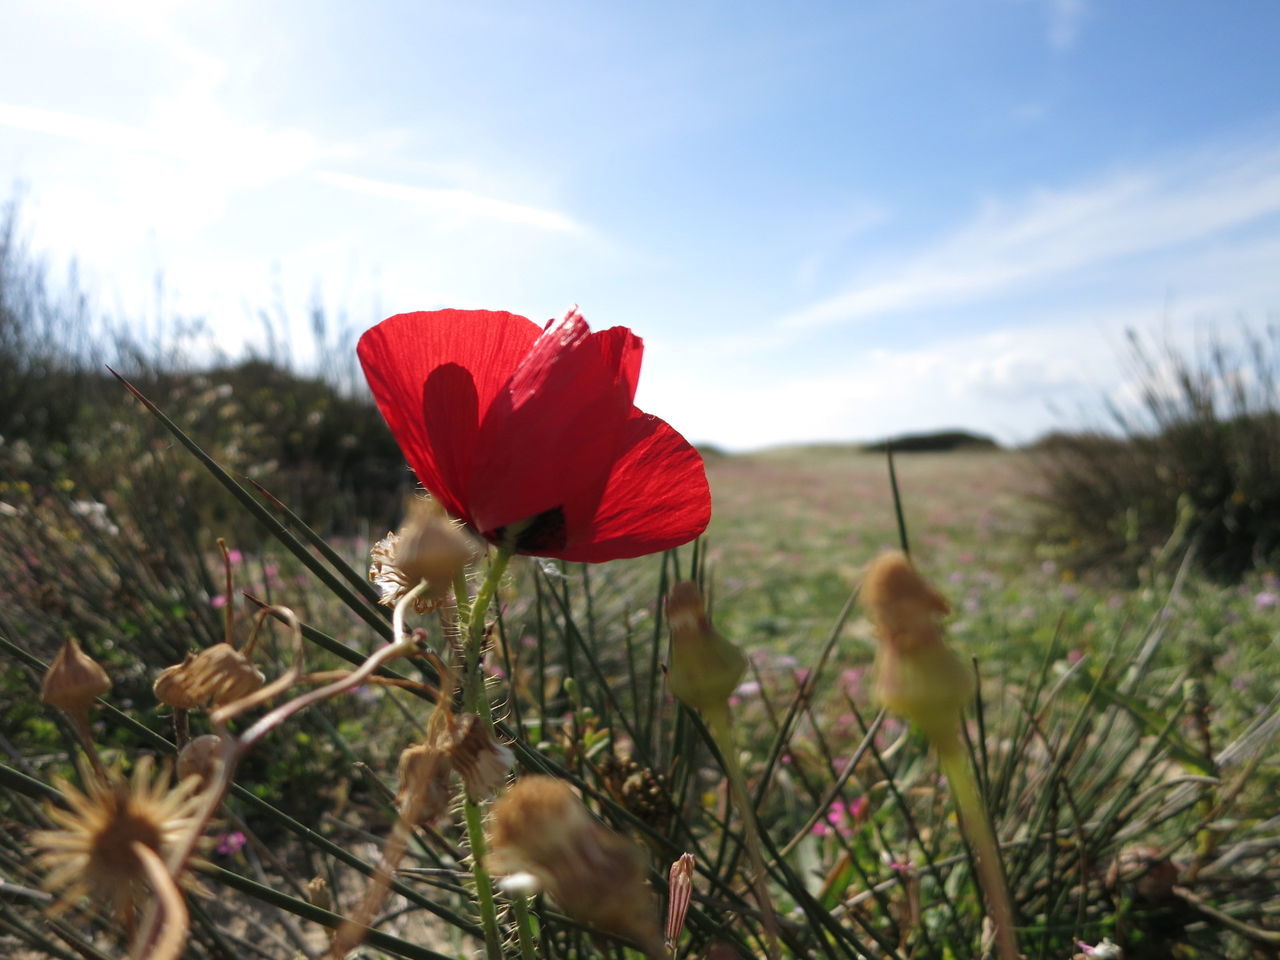 CLOSE-UP OF RED POPPY BLOOMING IN FIELD